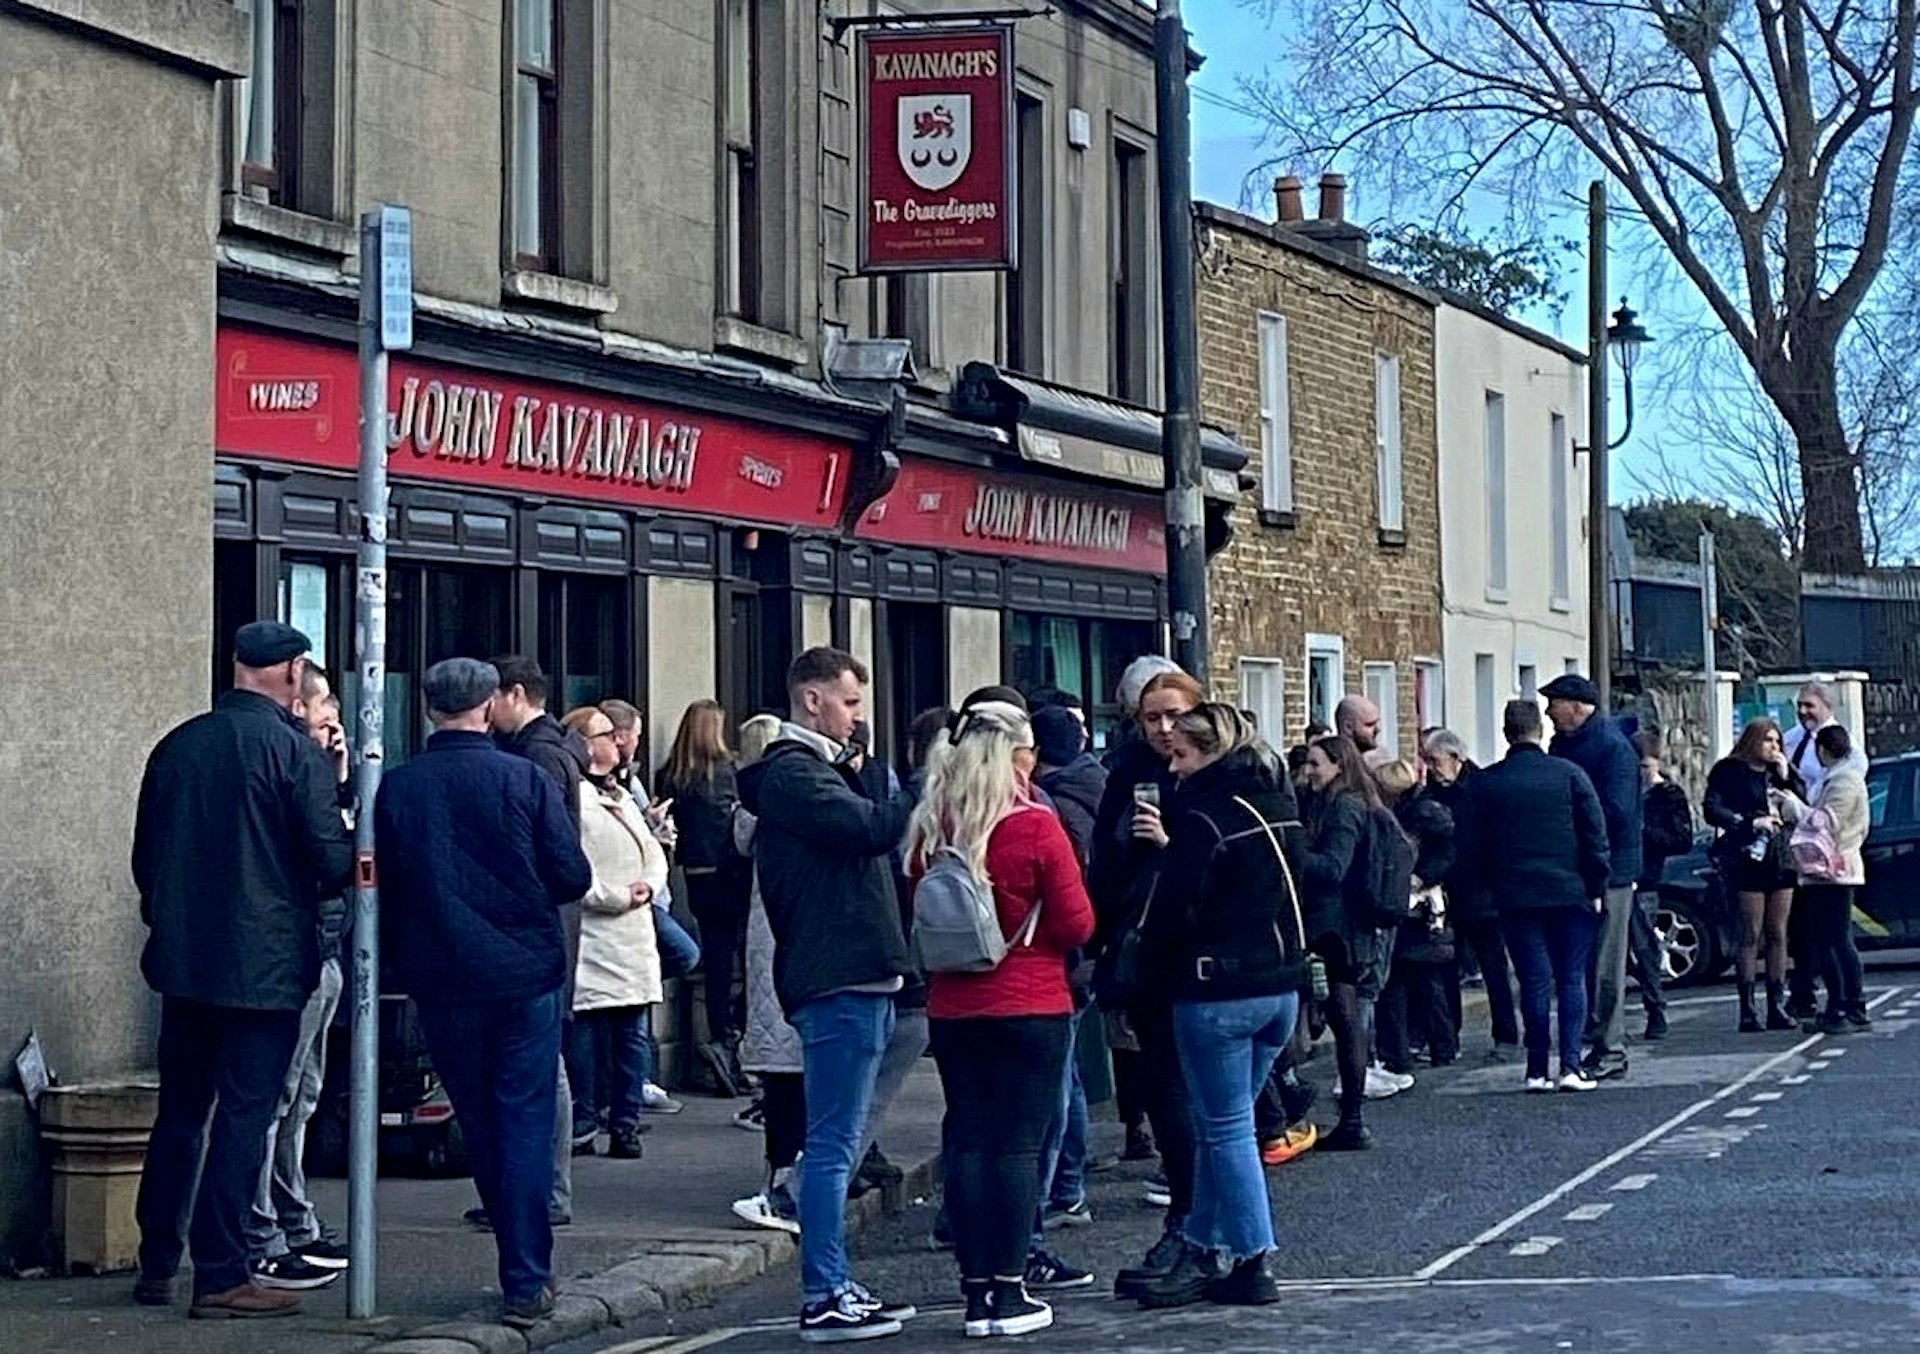 People gather in front of John Kavanagh's aka Gravediggers pub, in Dublin on a winter day